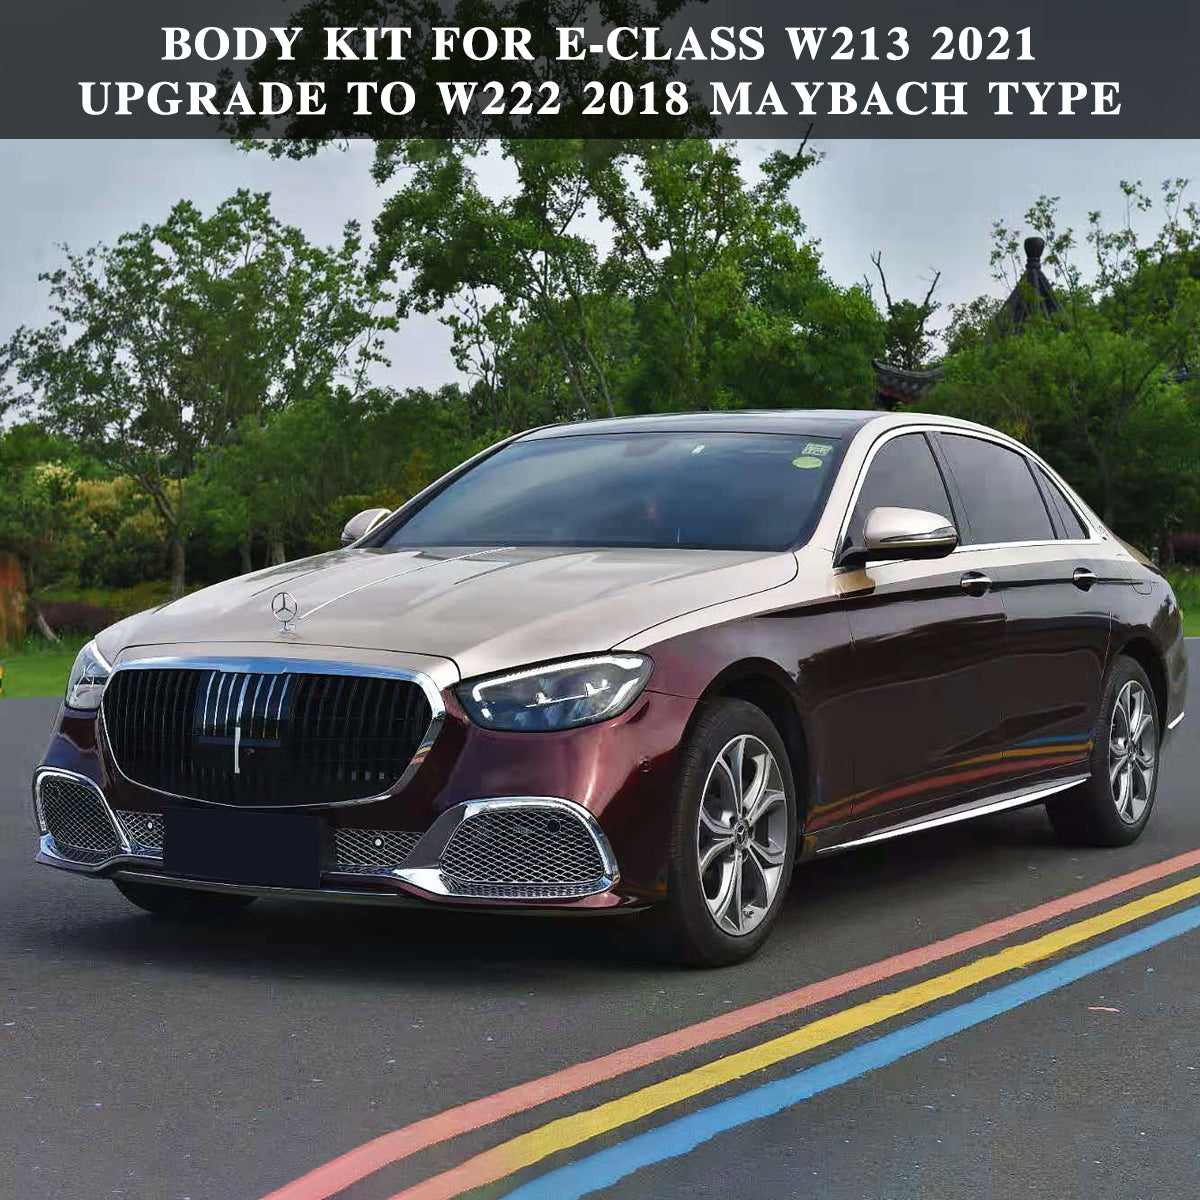 THE BODY KIT FOR W213 2021+ UPGRADE TO MAYBACH STYLE